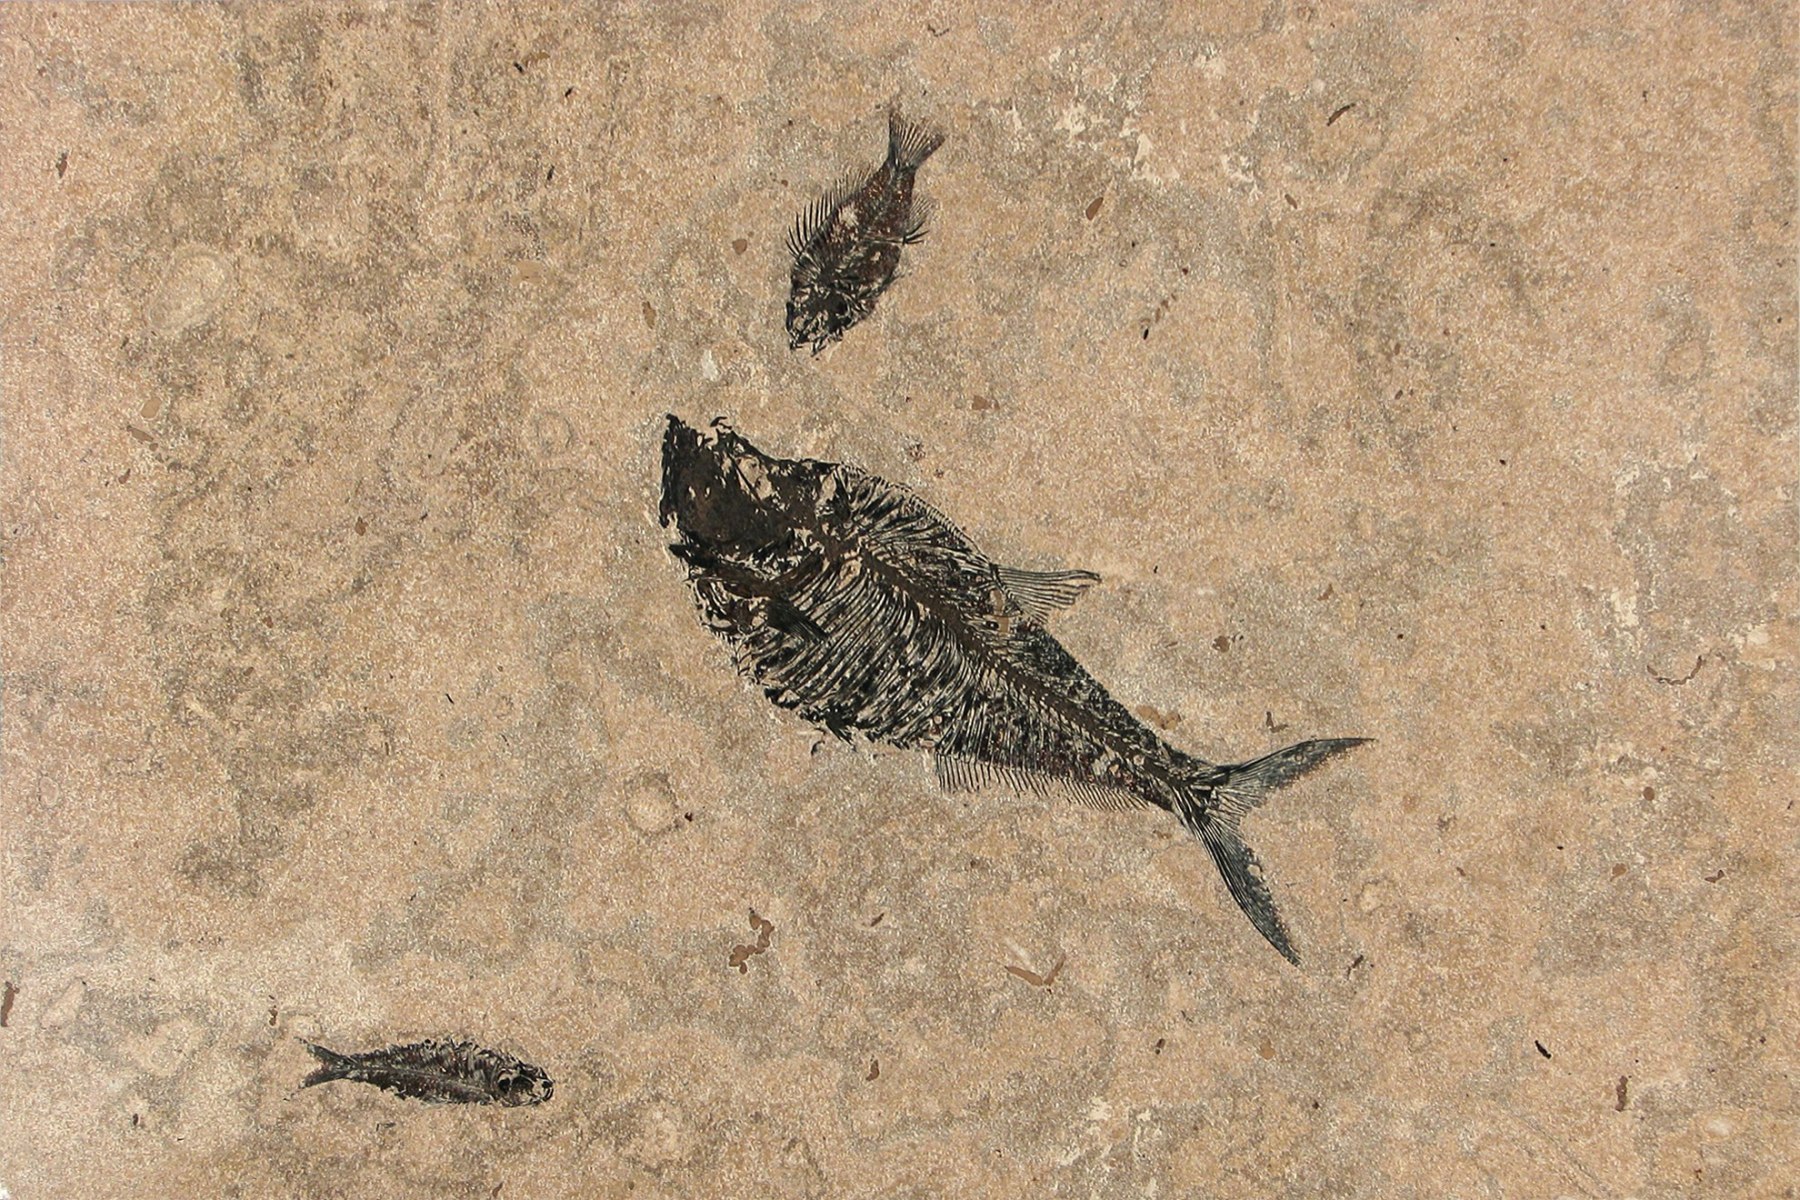 A large 24" x 36" "Honed" fossil fish tile. The fossil tile contains a large Diplomystus, a Priscacara, and a Knightia fossil.